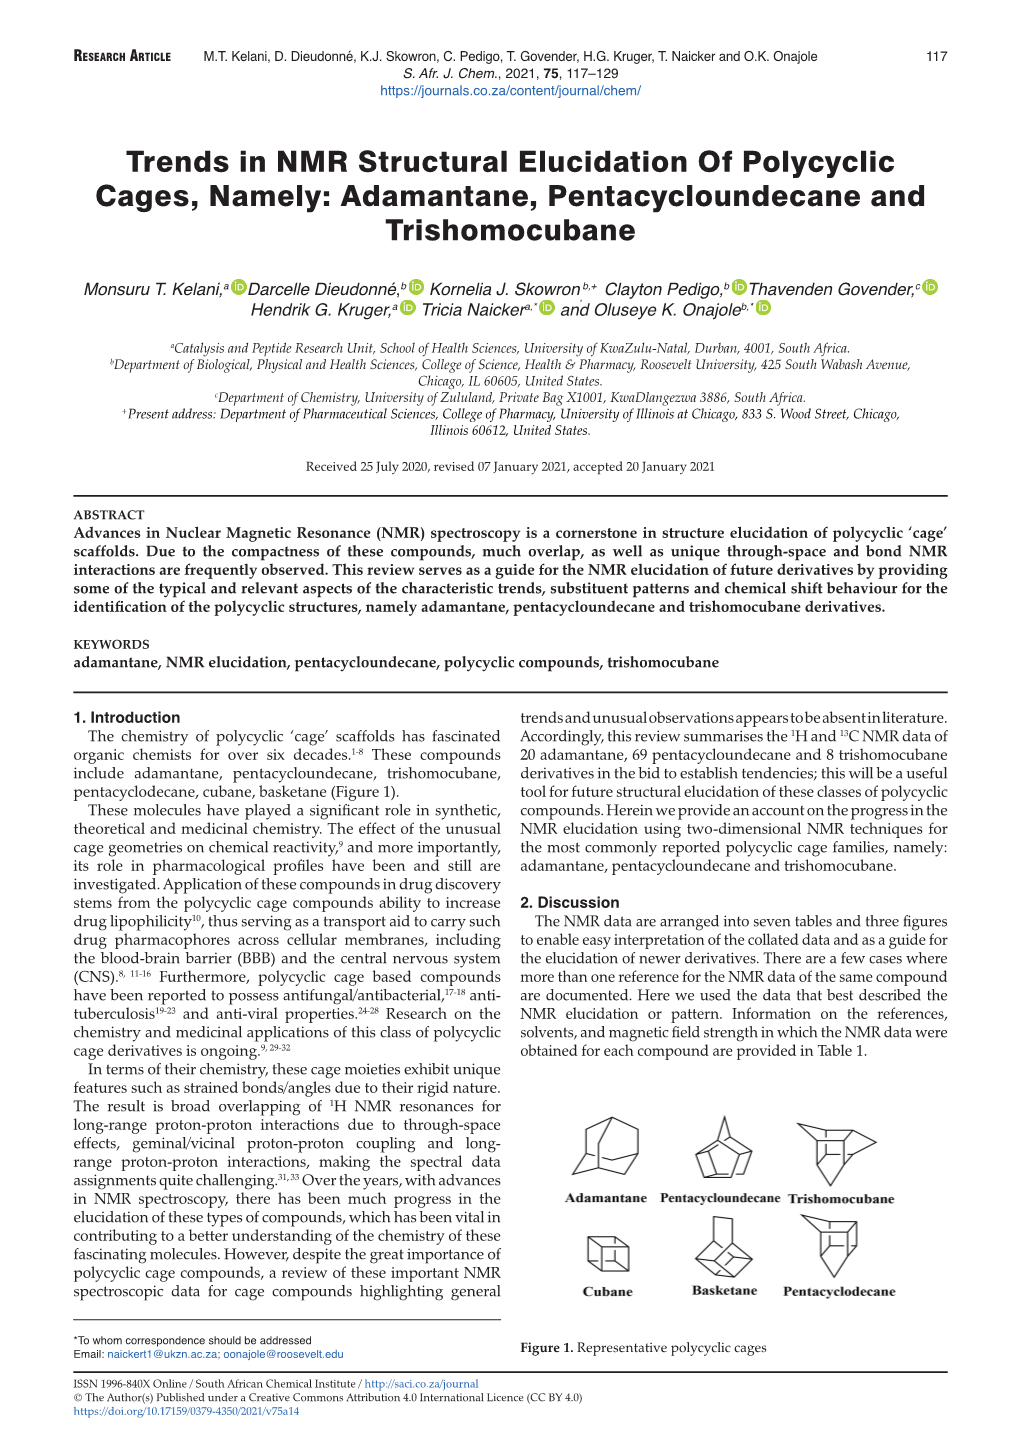 Trends in NMR Structural Elucidation of Polycyclic Cages, Namely: Adamantane, Pentacycloundecane and Trishomocubane